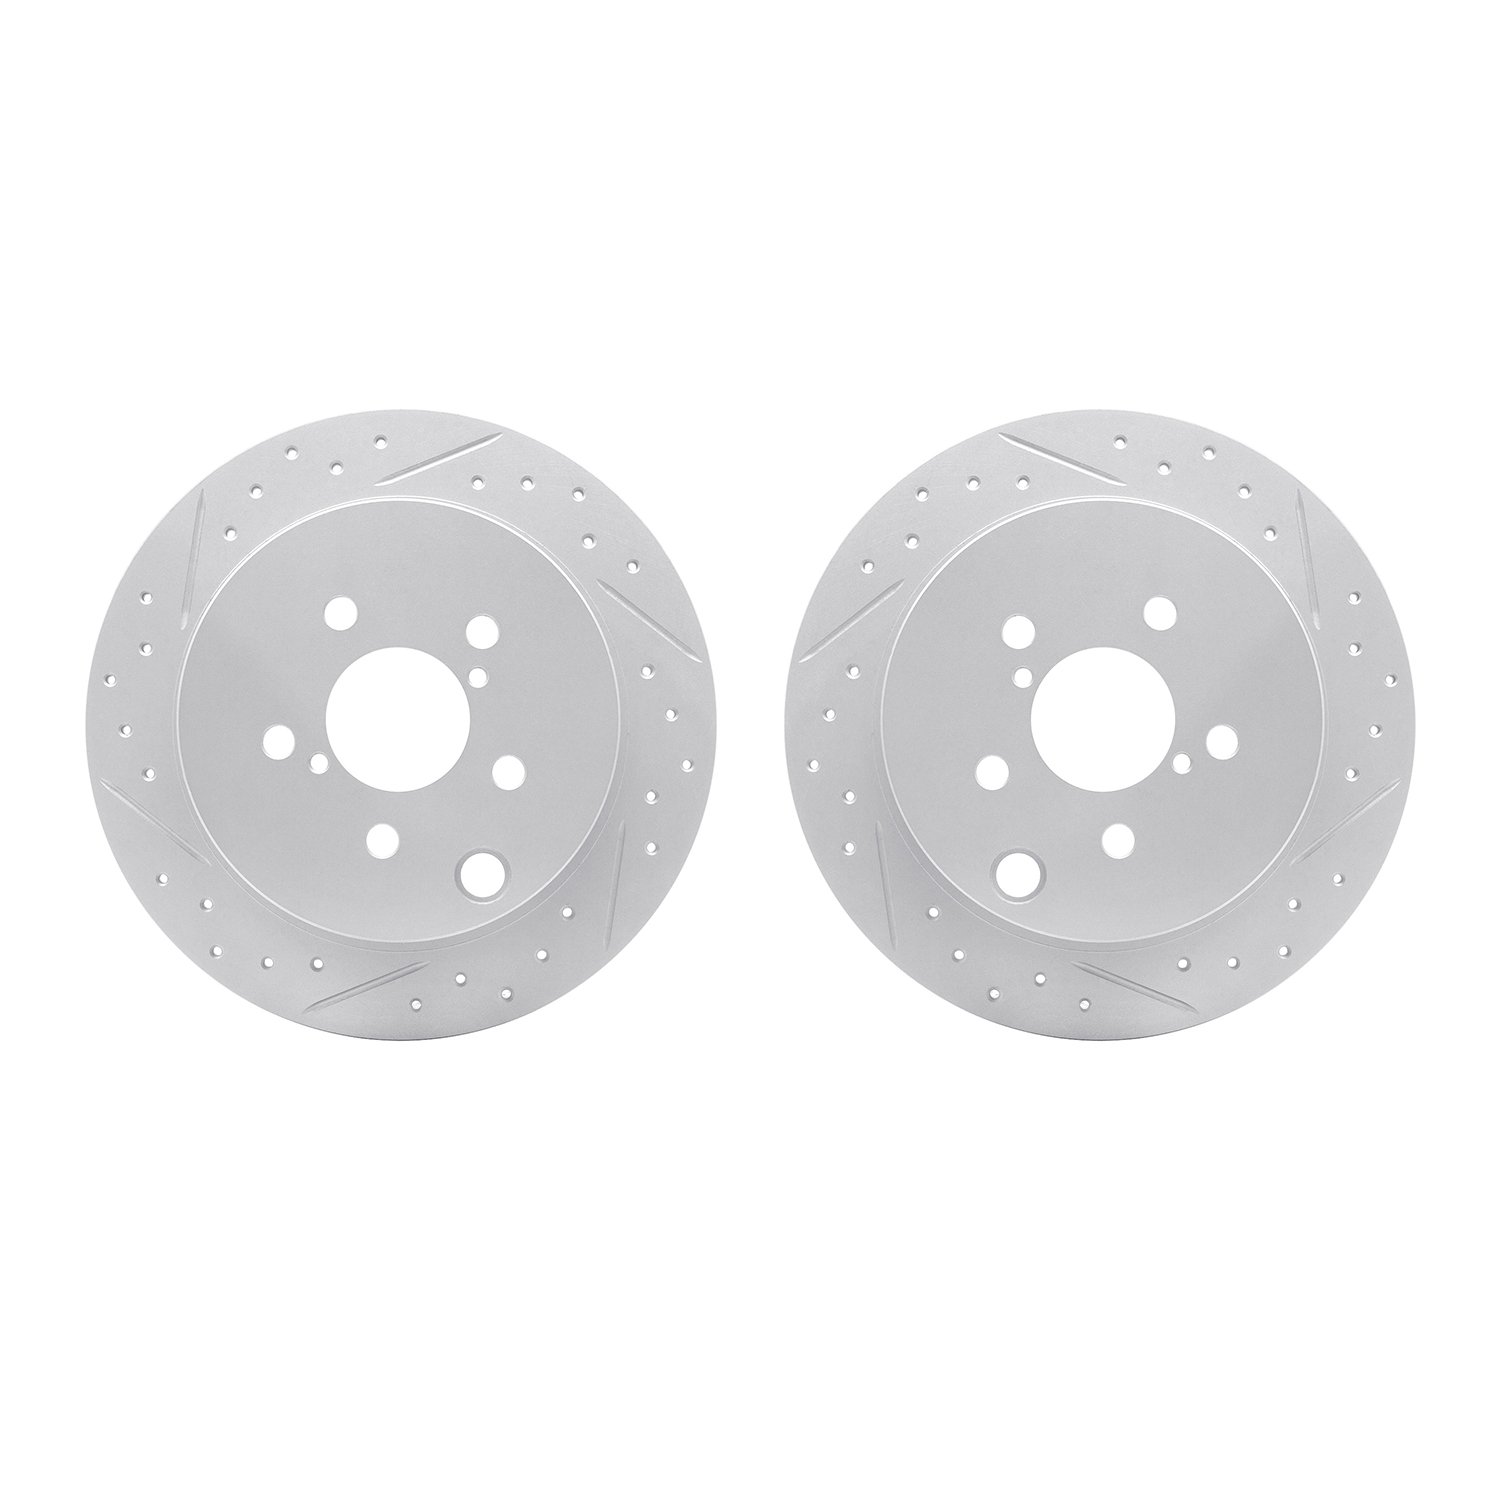 2002-13023 Geoperformance Drilled/Slotted Brake Rotors, Fits Select Subaru, Position: Rear